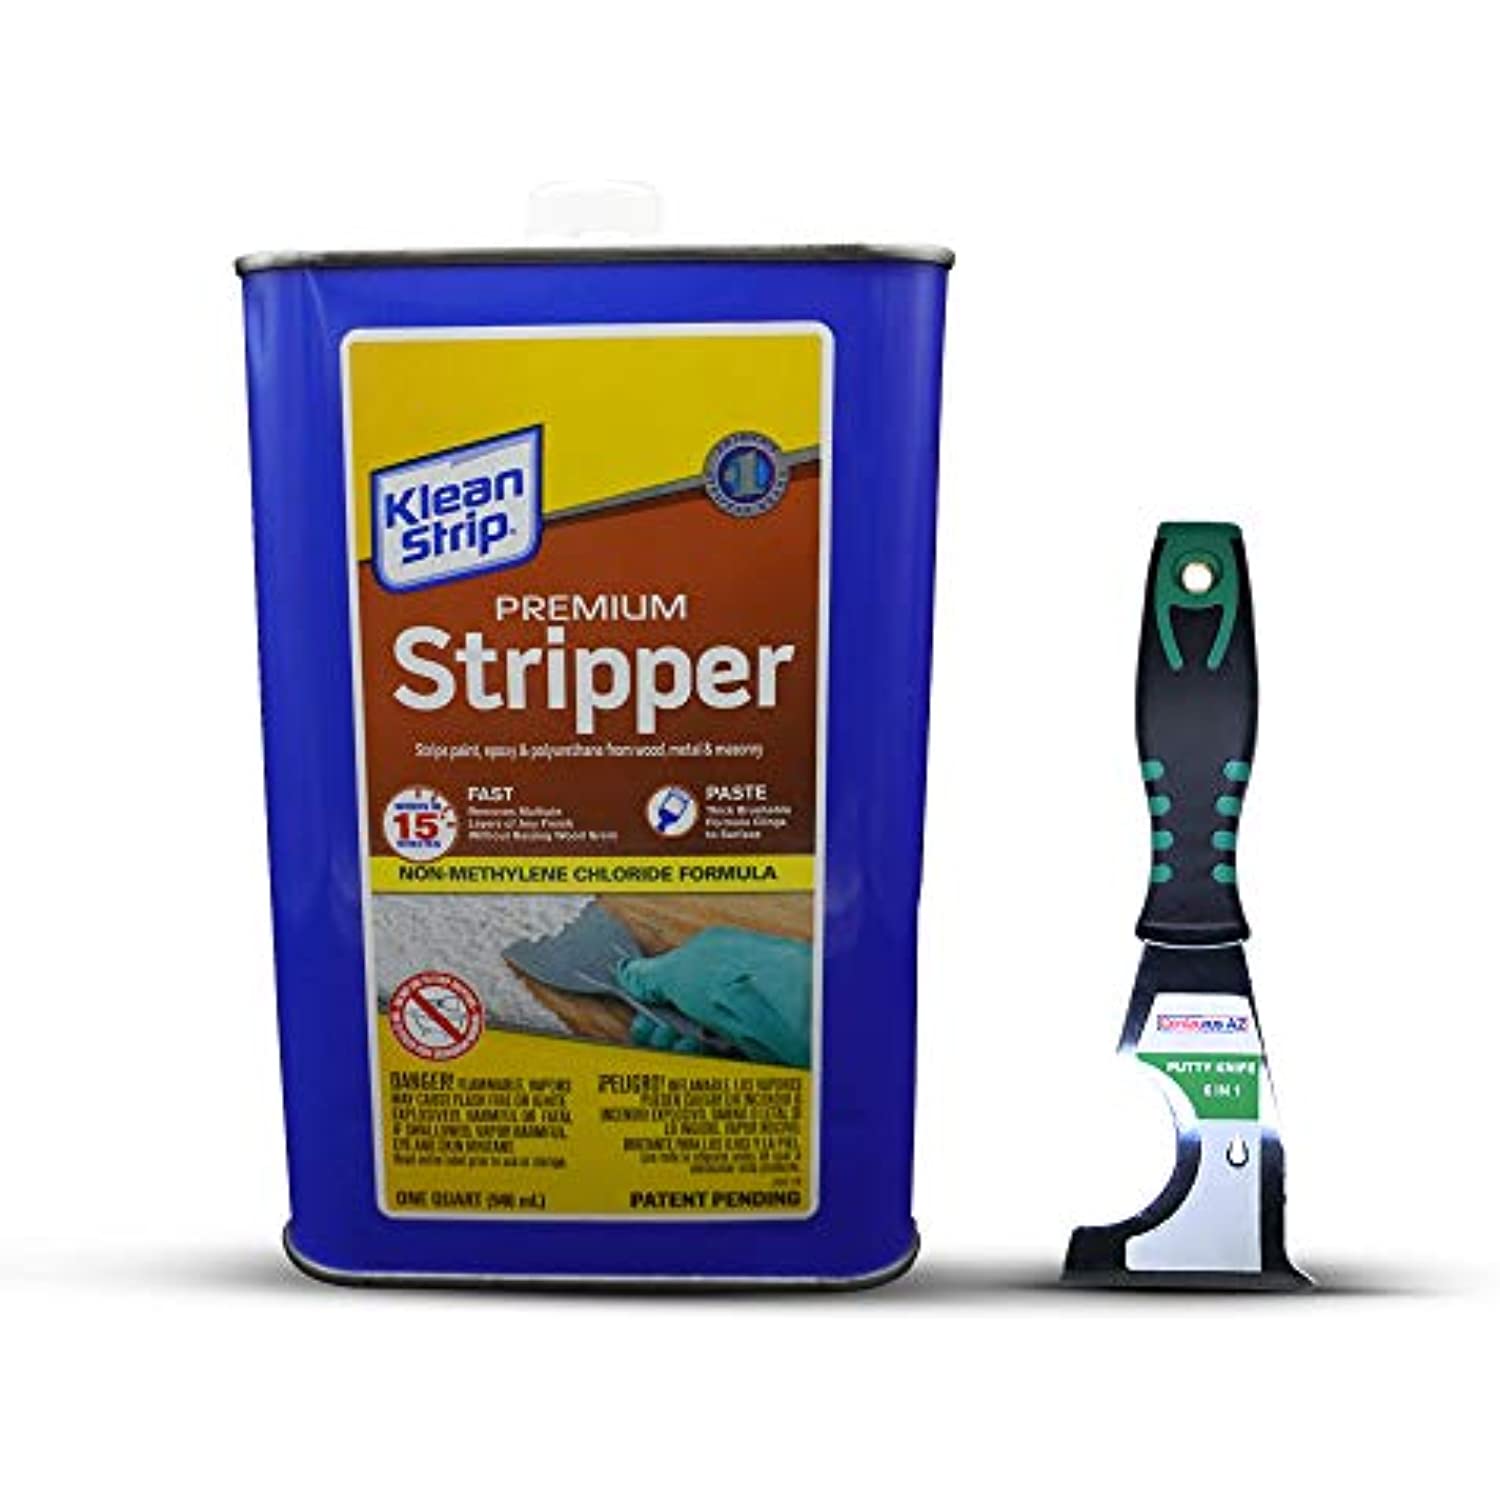 Klean Strip Premium Stripper Non-Methylene Chloride Formula Fast-Acting Liquid Works 15-mins Removes Multiple Layers of Latex and Oil-Based Paint Now Comes with Putty Knife by Centaurus AZ 1 Quart